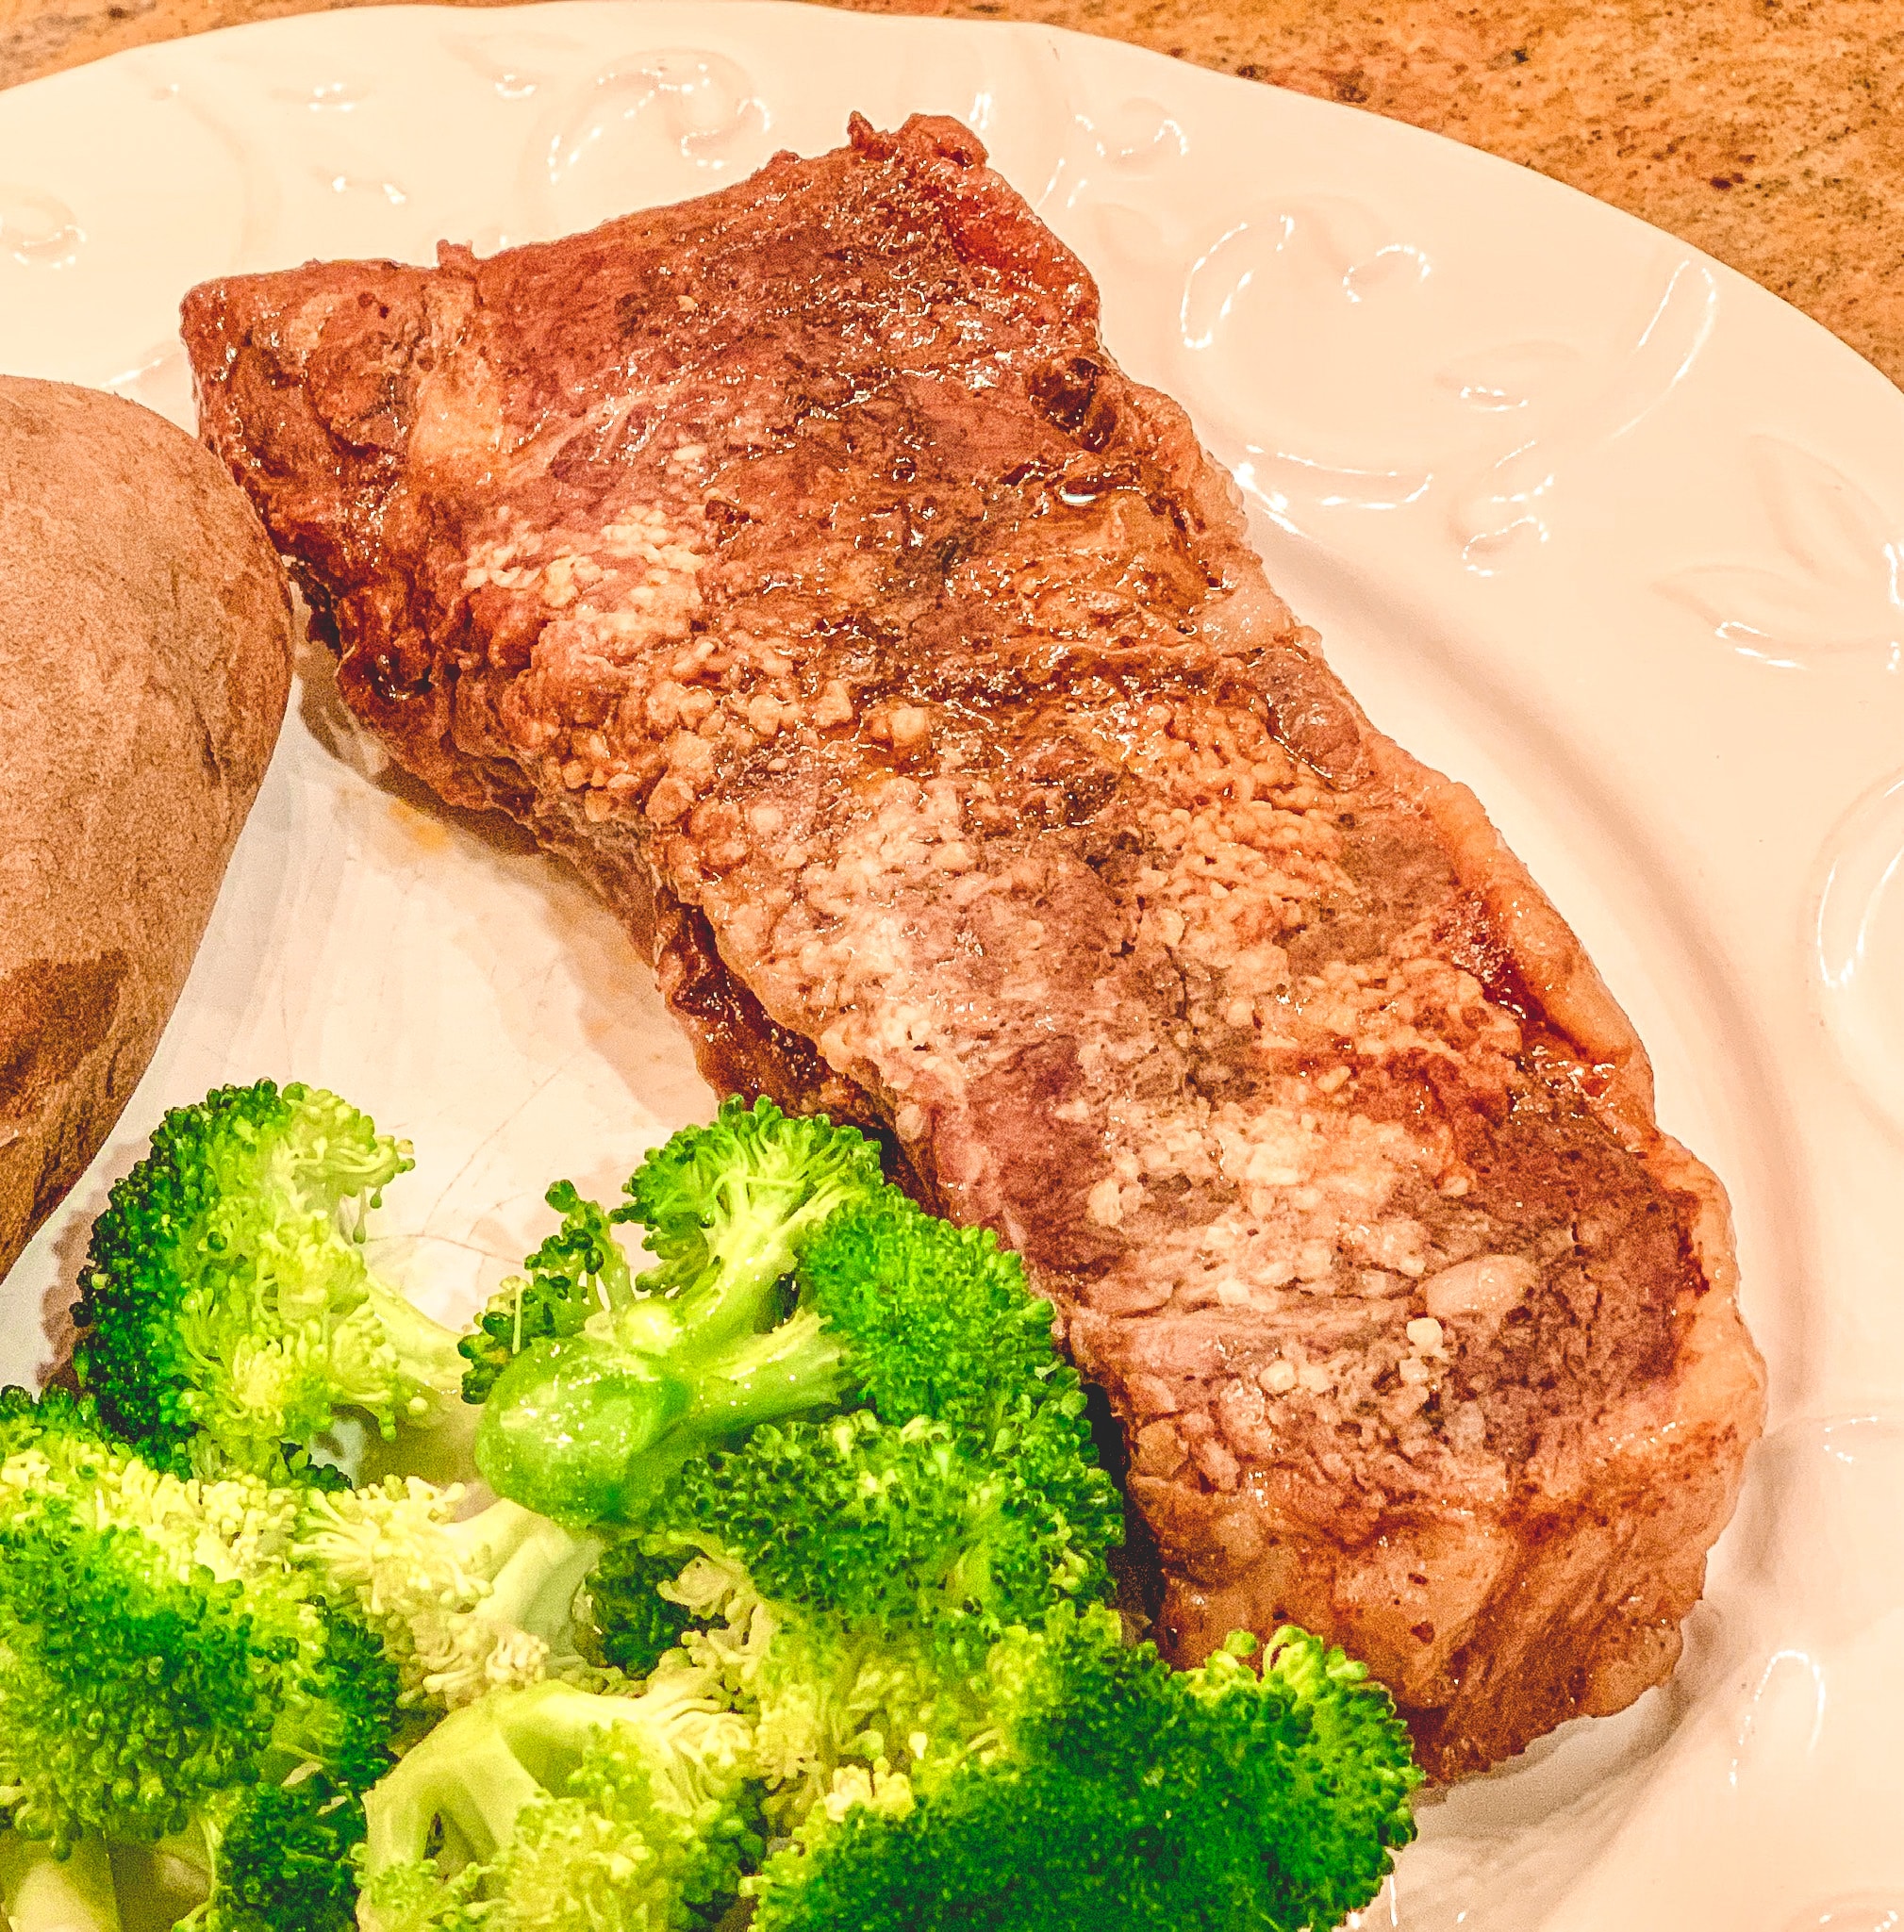 Steak on a white plate with garlic, broccoli.